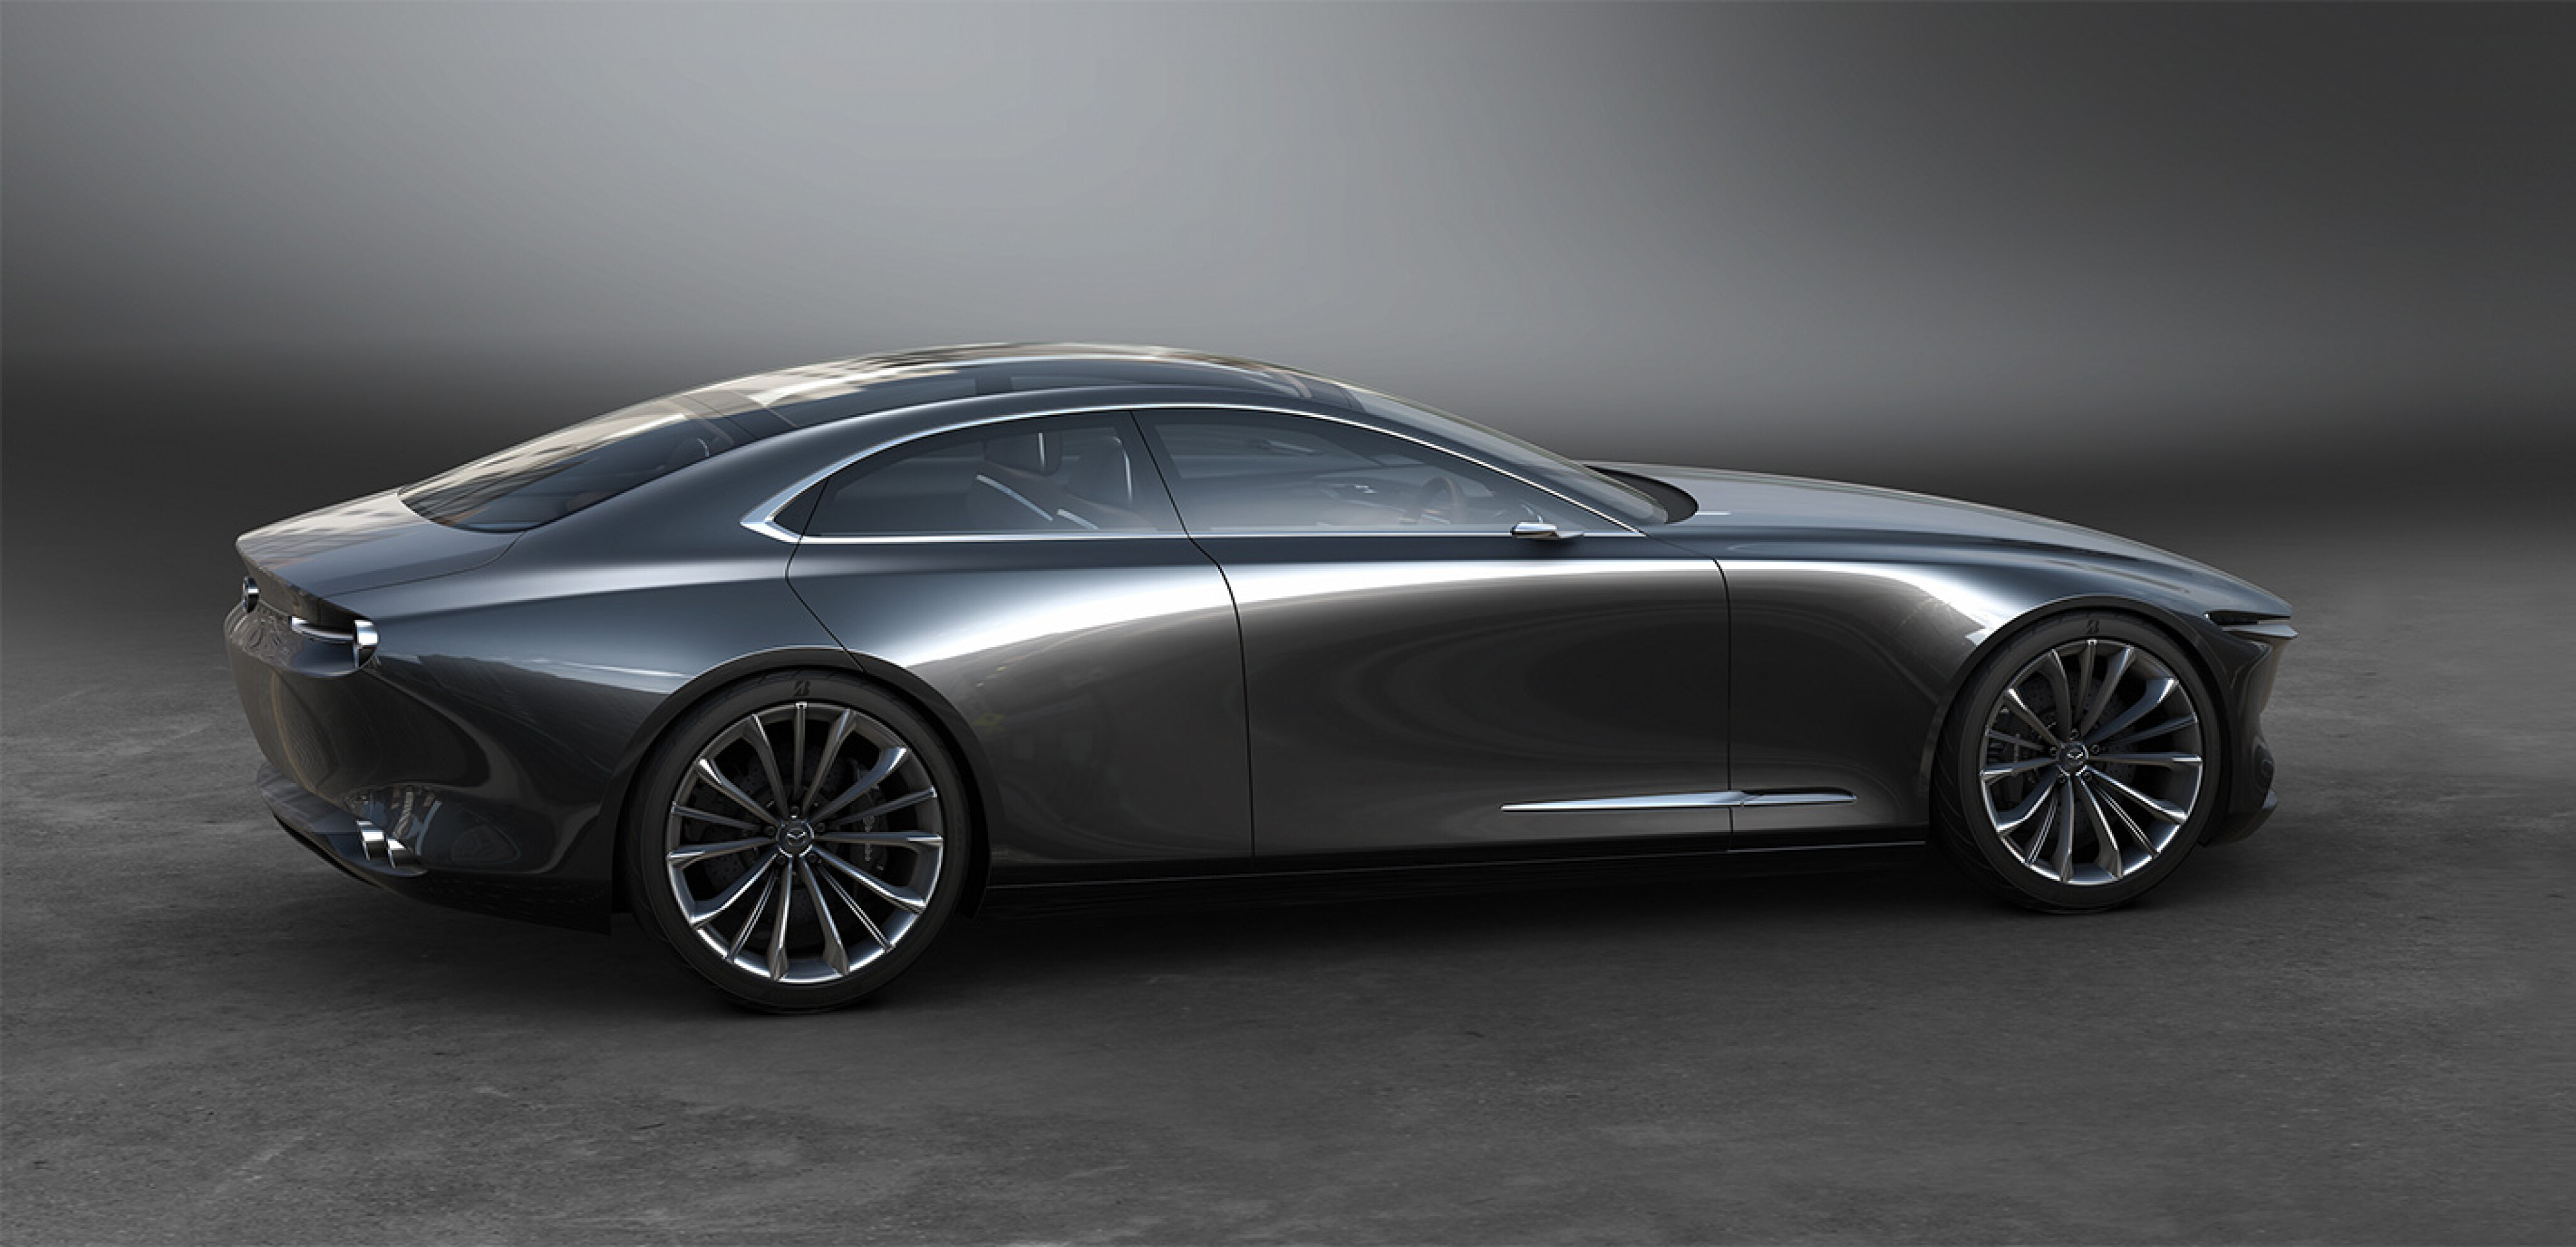 b84109f8/mazda vision coupe concept rear side jpg